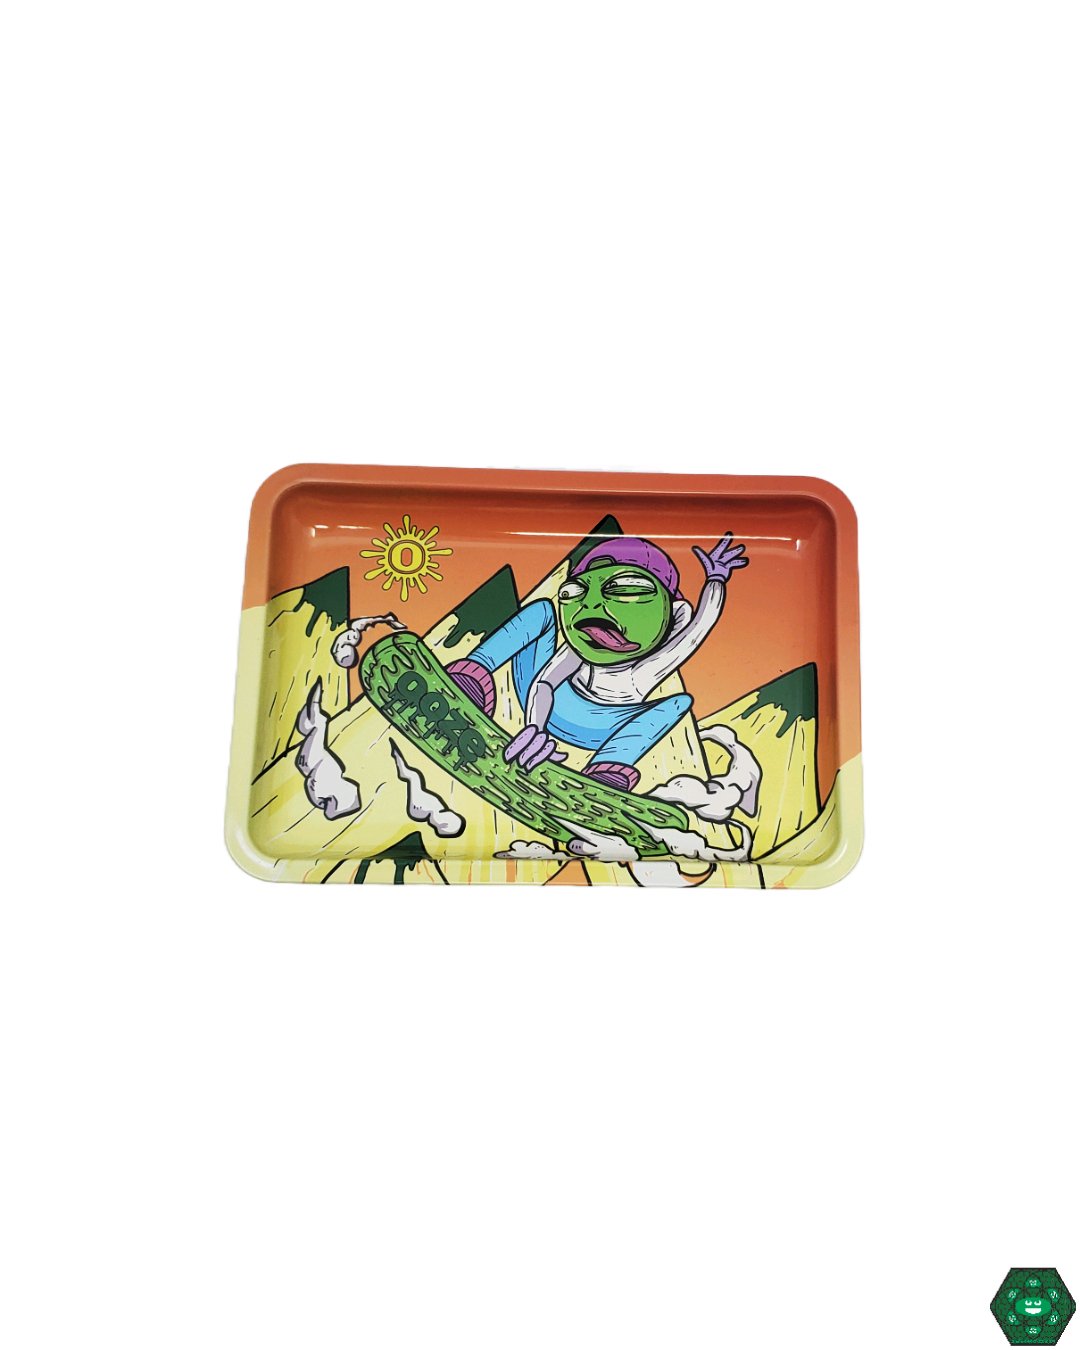 Ooze - Small Rolling Trays - @Ooze - HG